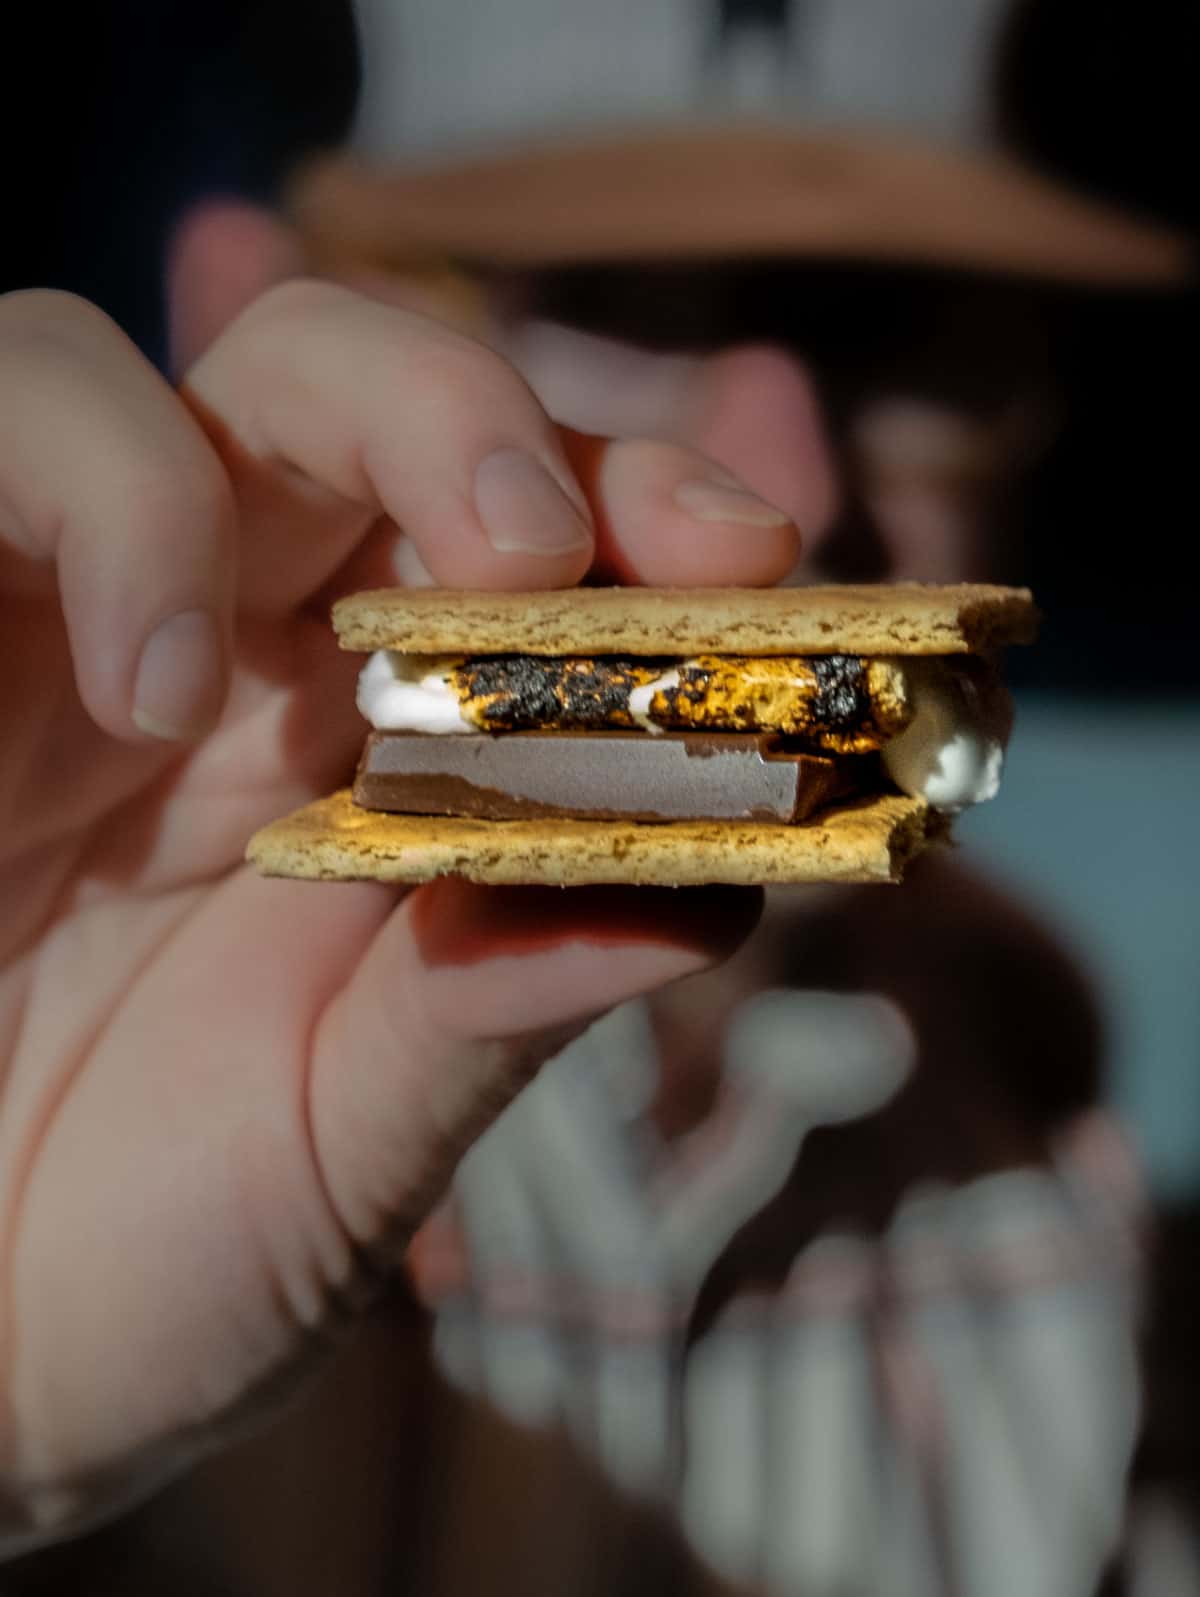 Sean Martin from Vindulge holding a s'more made with chocolate and roasted marshmallows